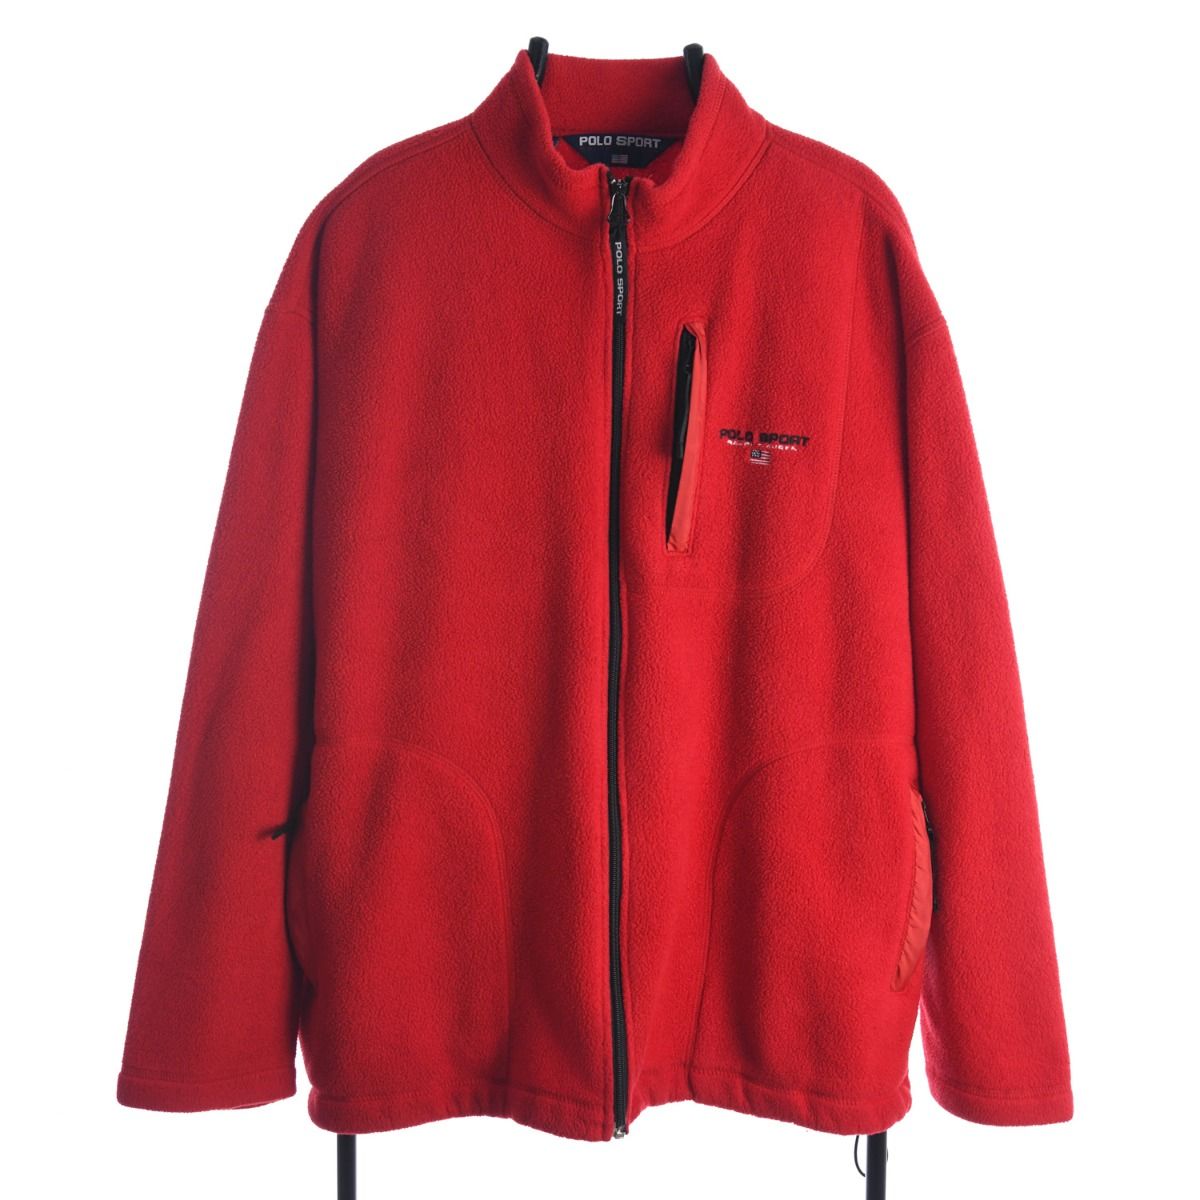 Ralph Lauren Polo Sport Red Fleece With Embroidered Breast Logo